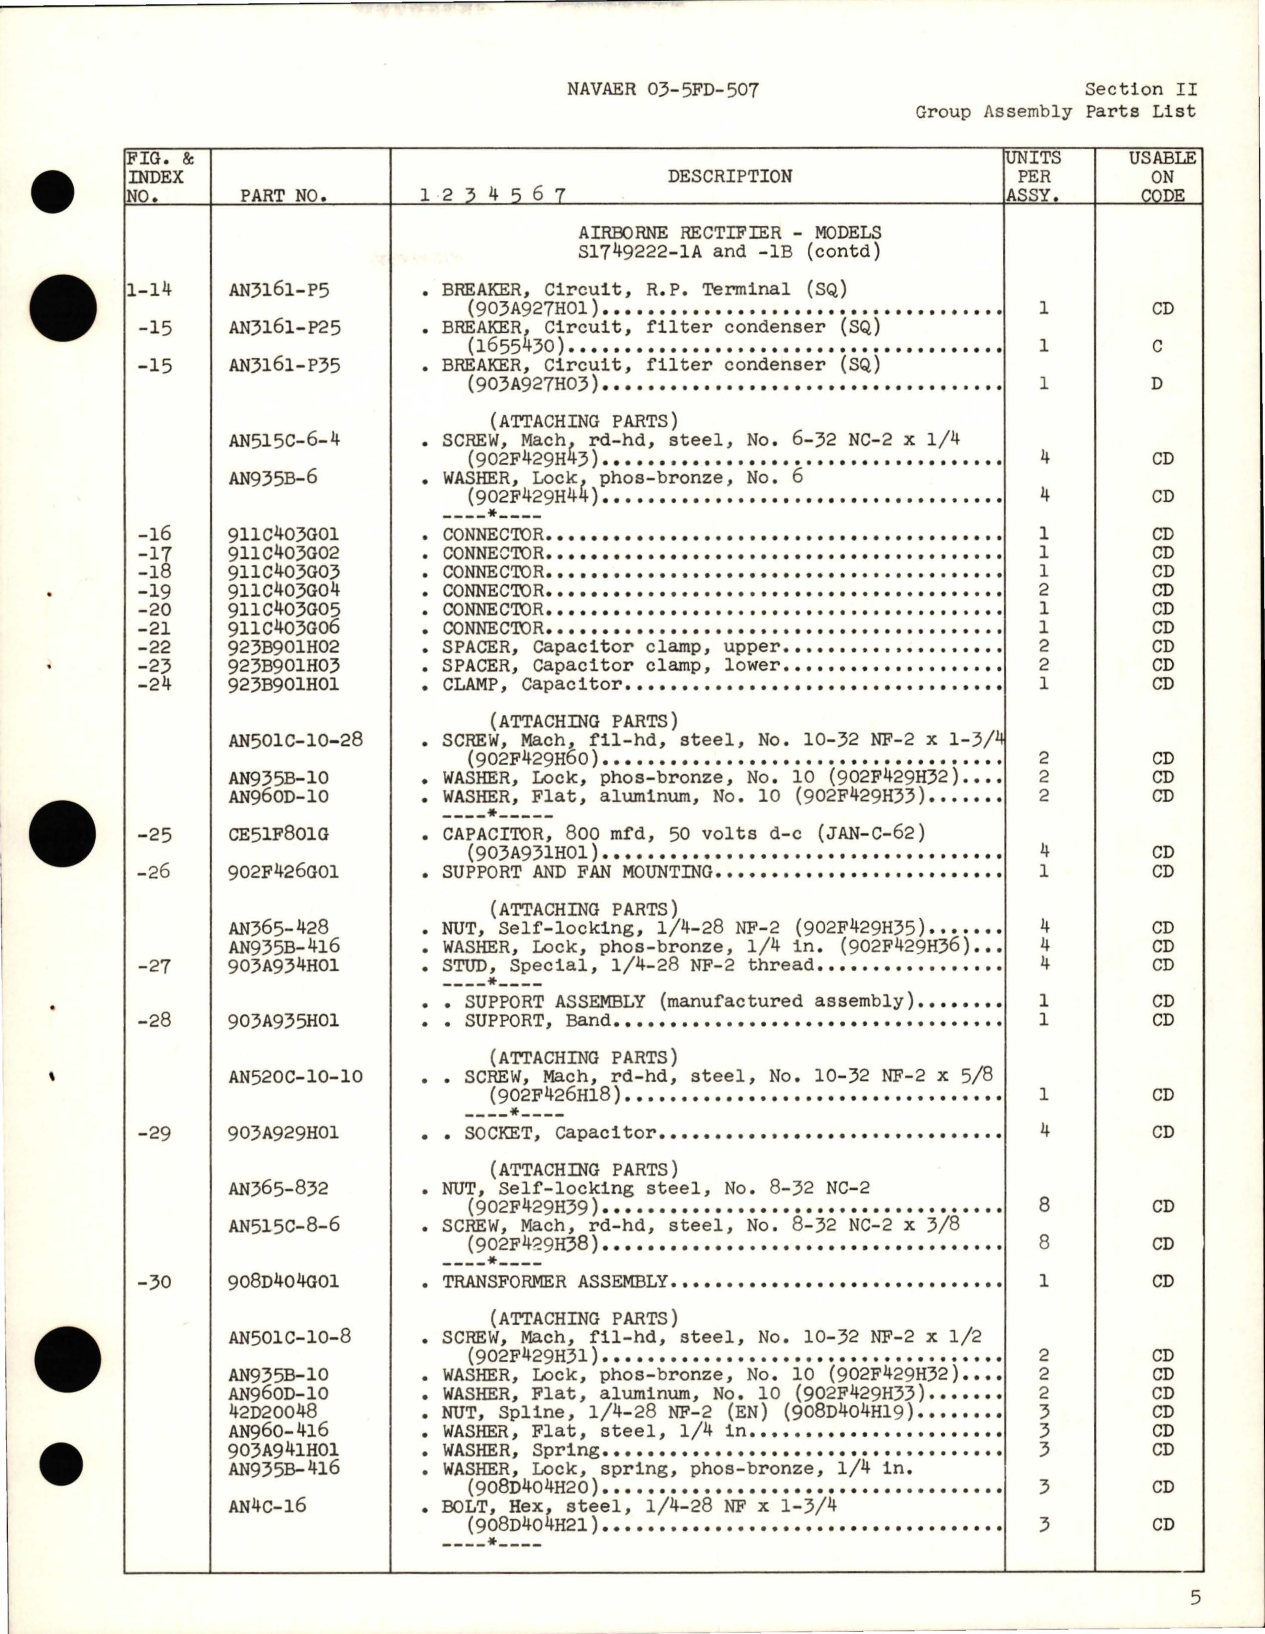 Sample page 9 from AirCorps Library document: Illustrated Parts Breakdown for Airborne Rectifier - Models S 1749222-1A, S 1749222-1B, S 1600919-A2, and S 1600919-B2 